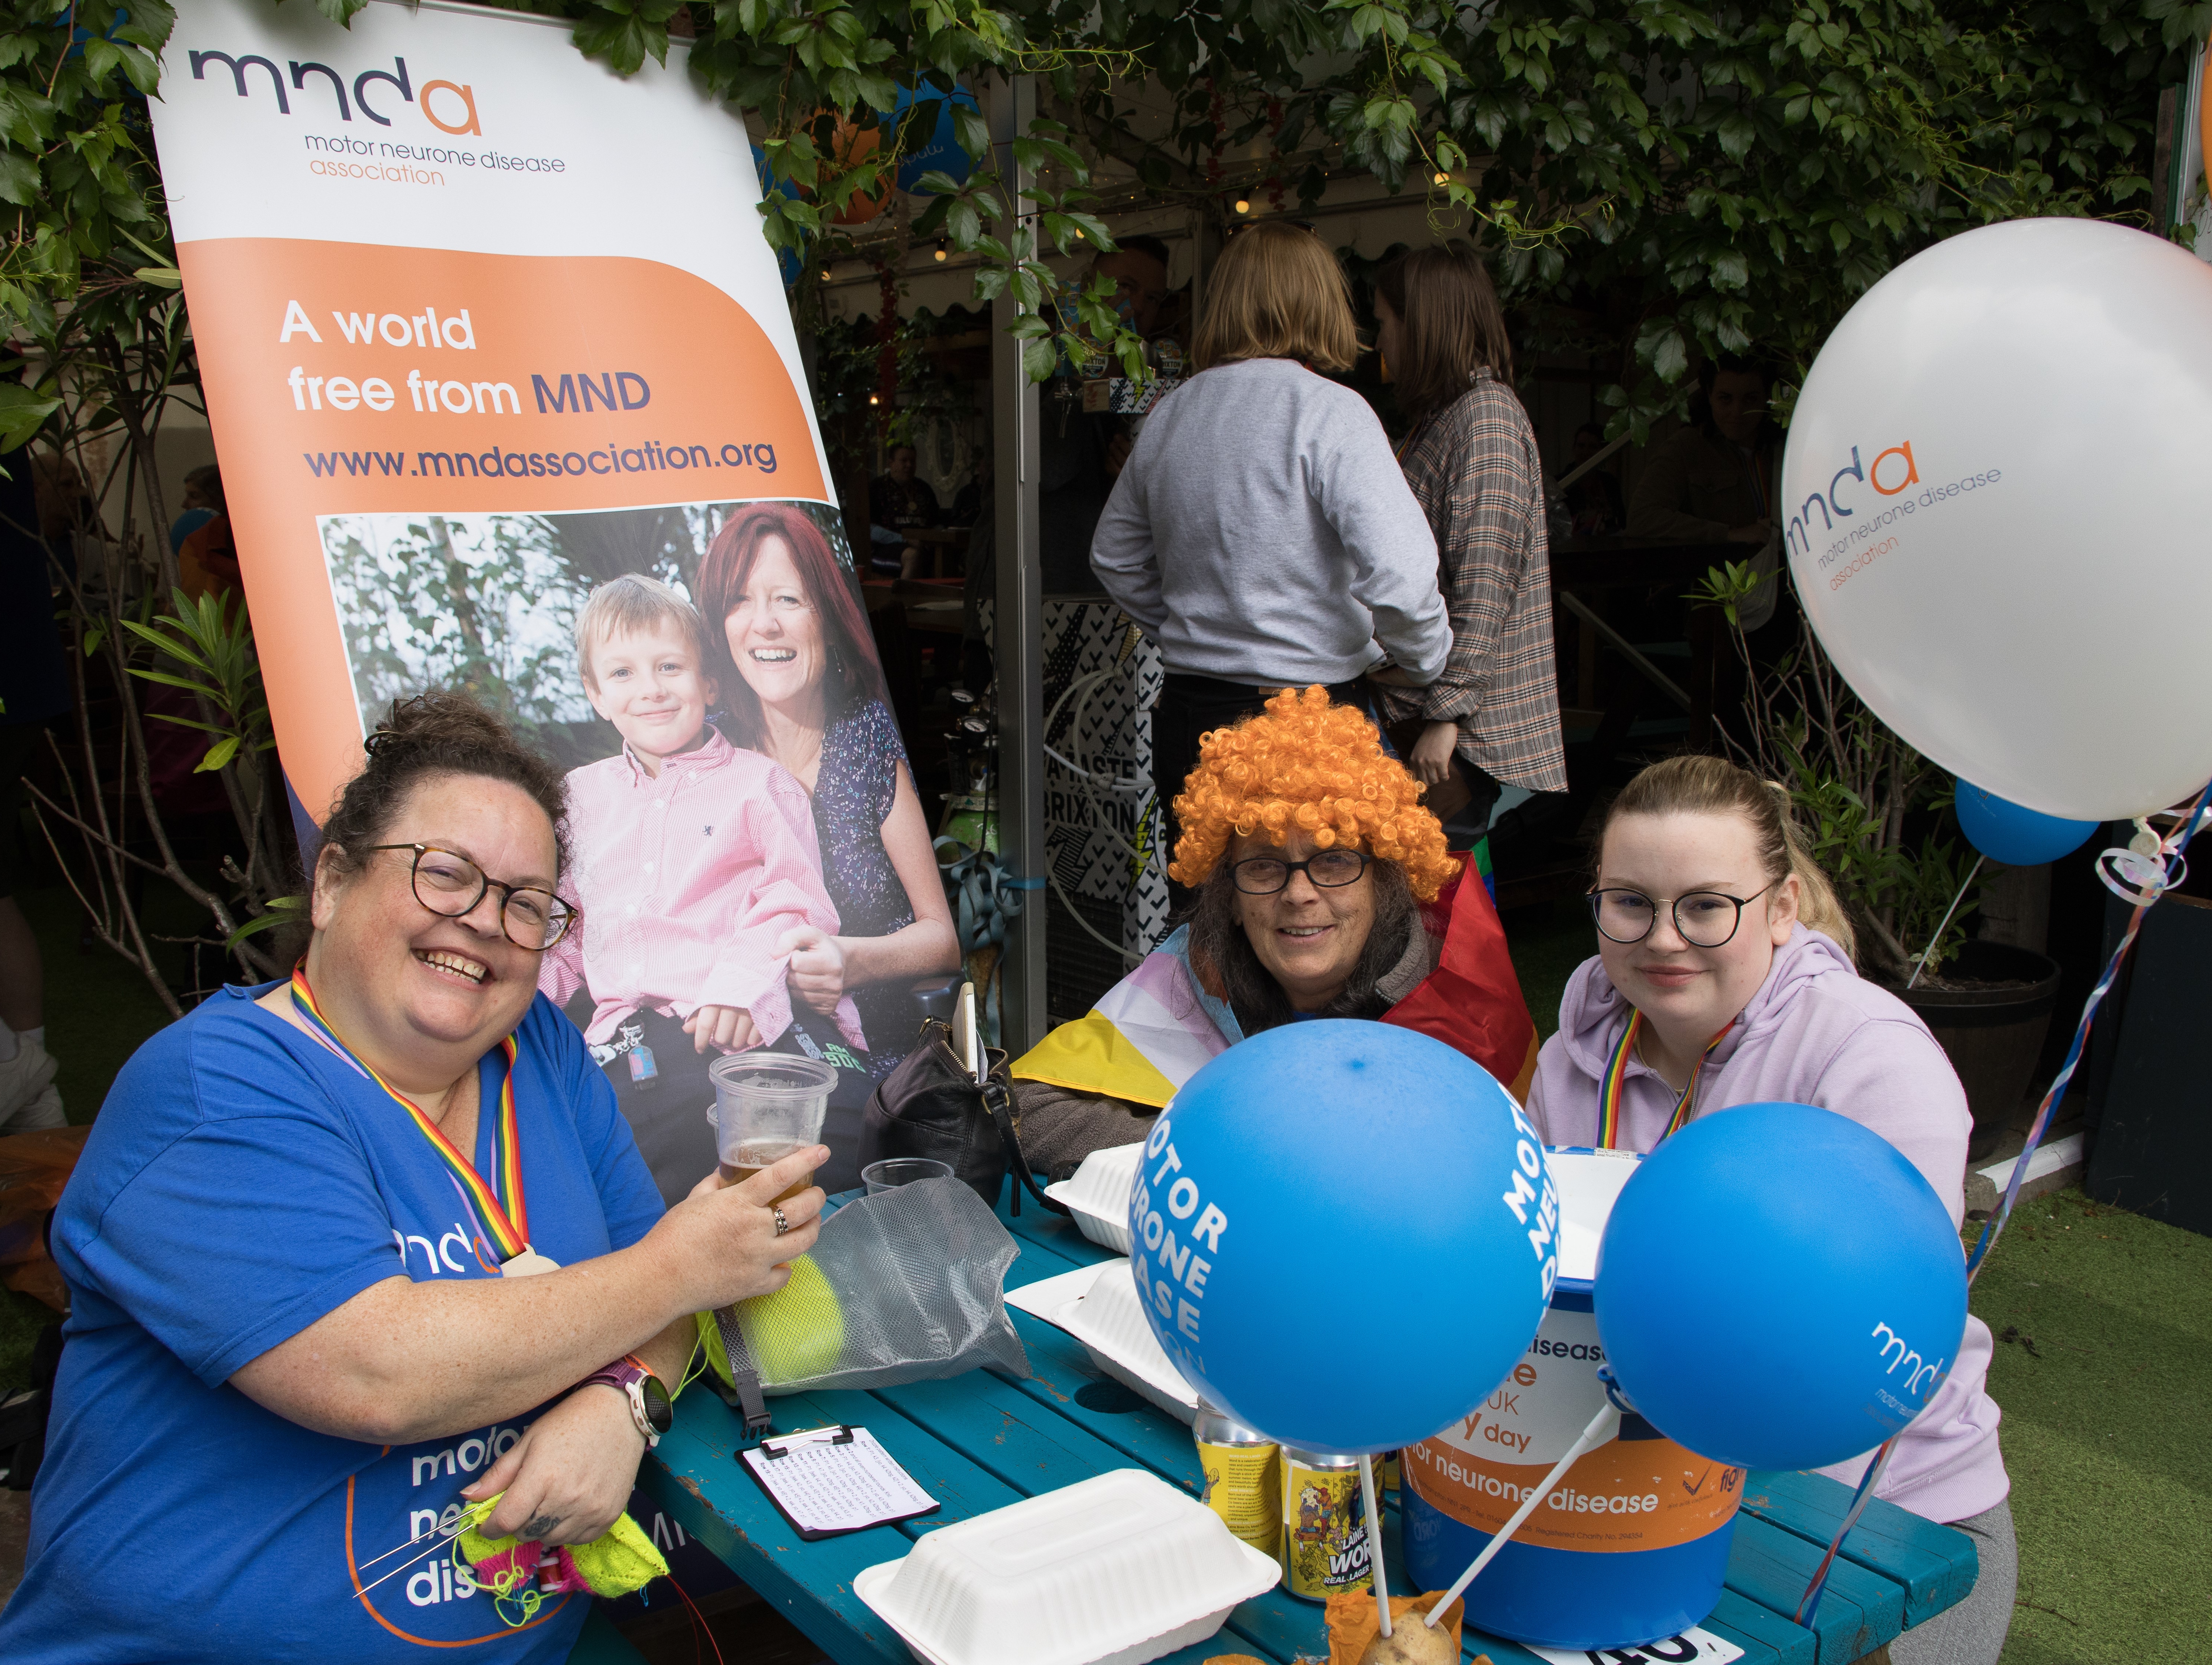 3 West London & Middlesex Branch Volunteers at a fundraising table at the Branch's Walk Event